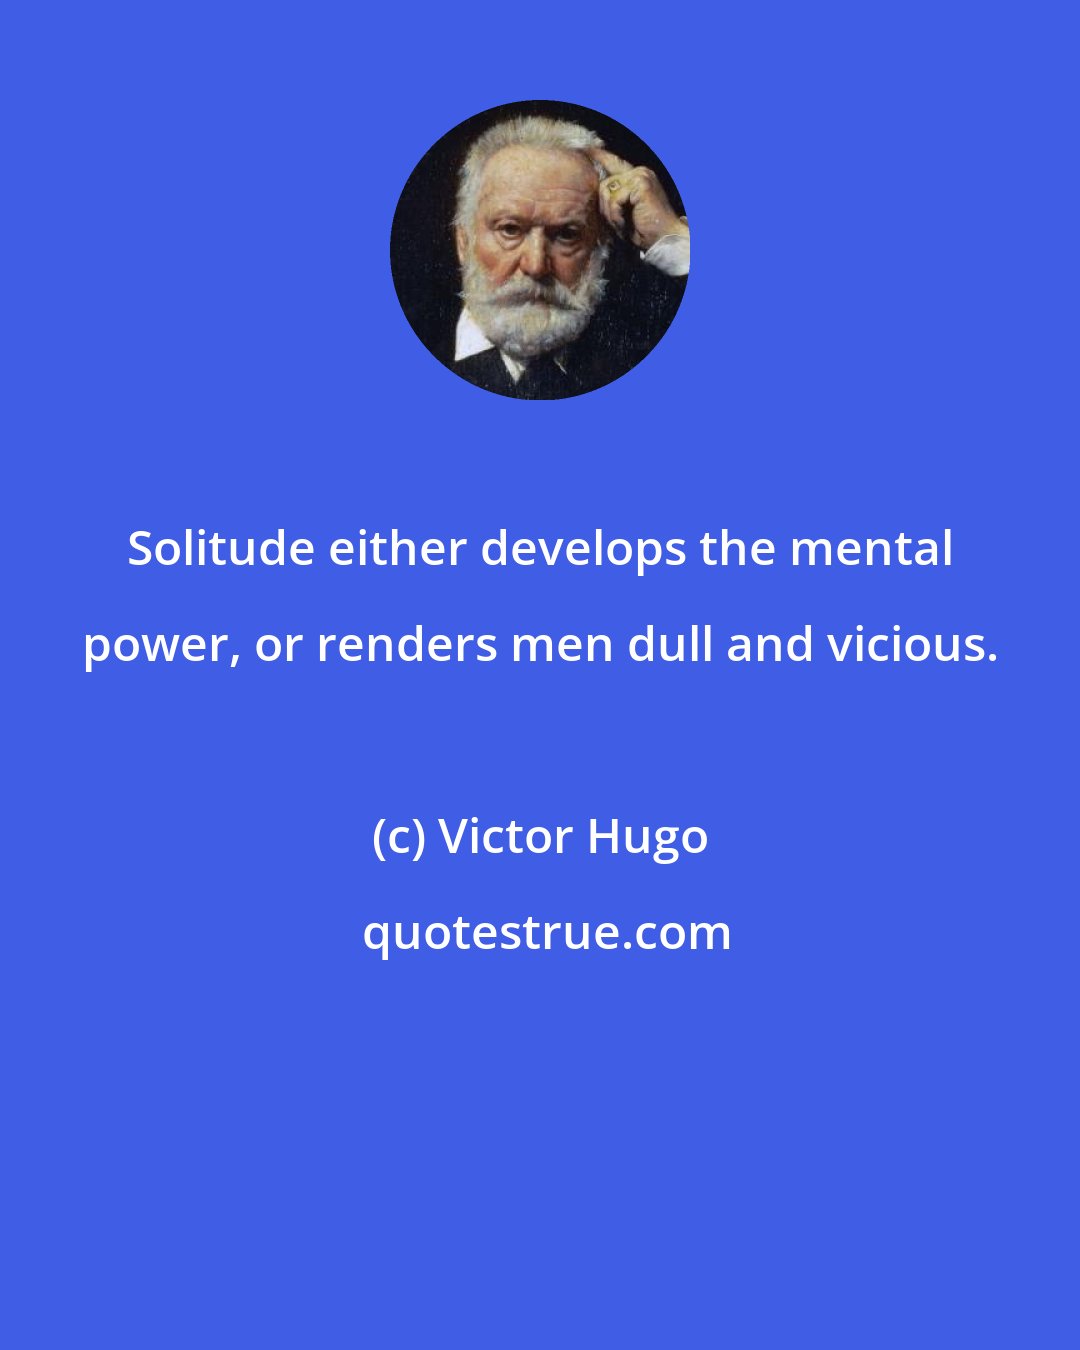 Victor Hugo: Solitude either develops the mental power, or renders men dull and vicious.